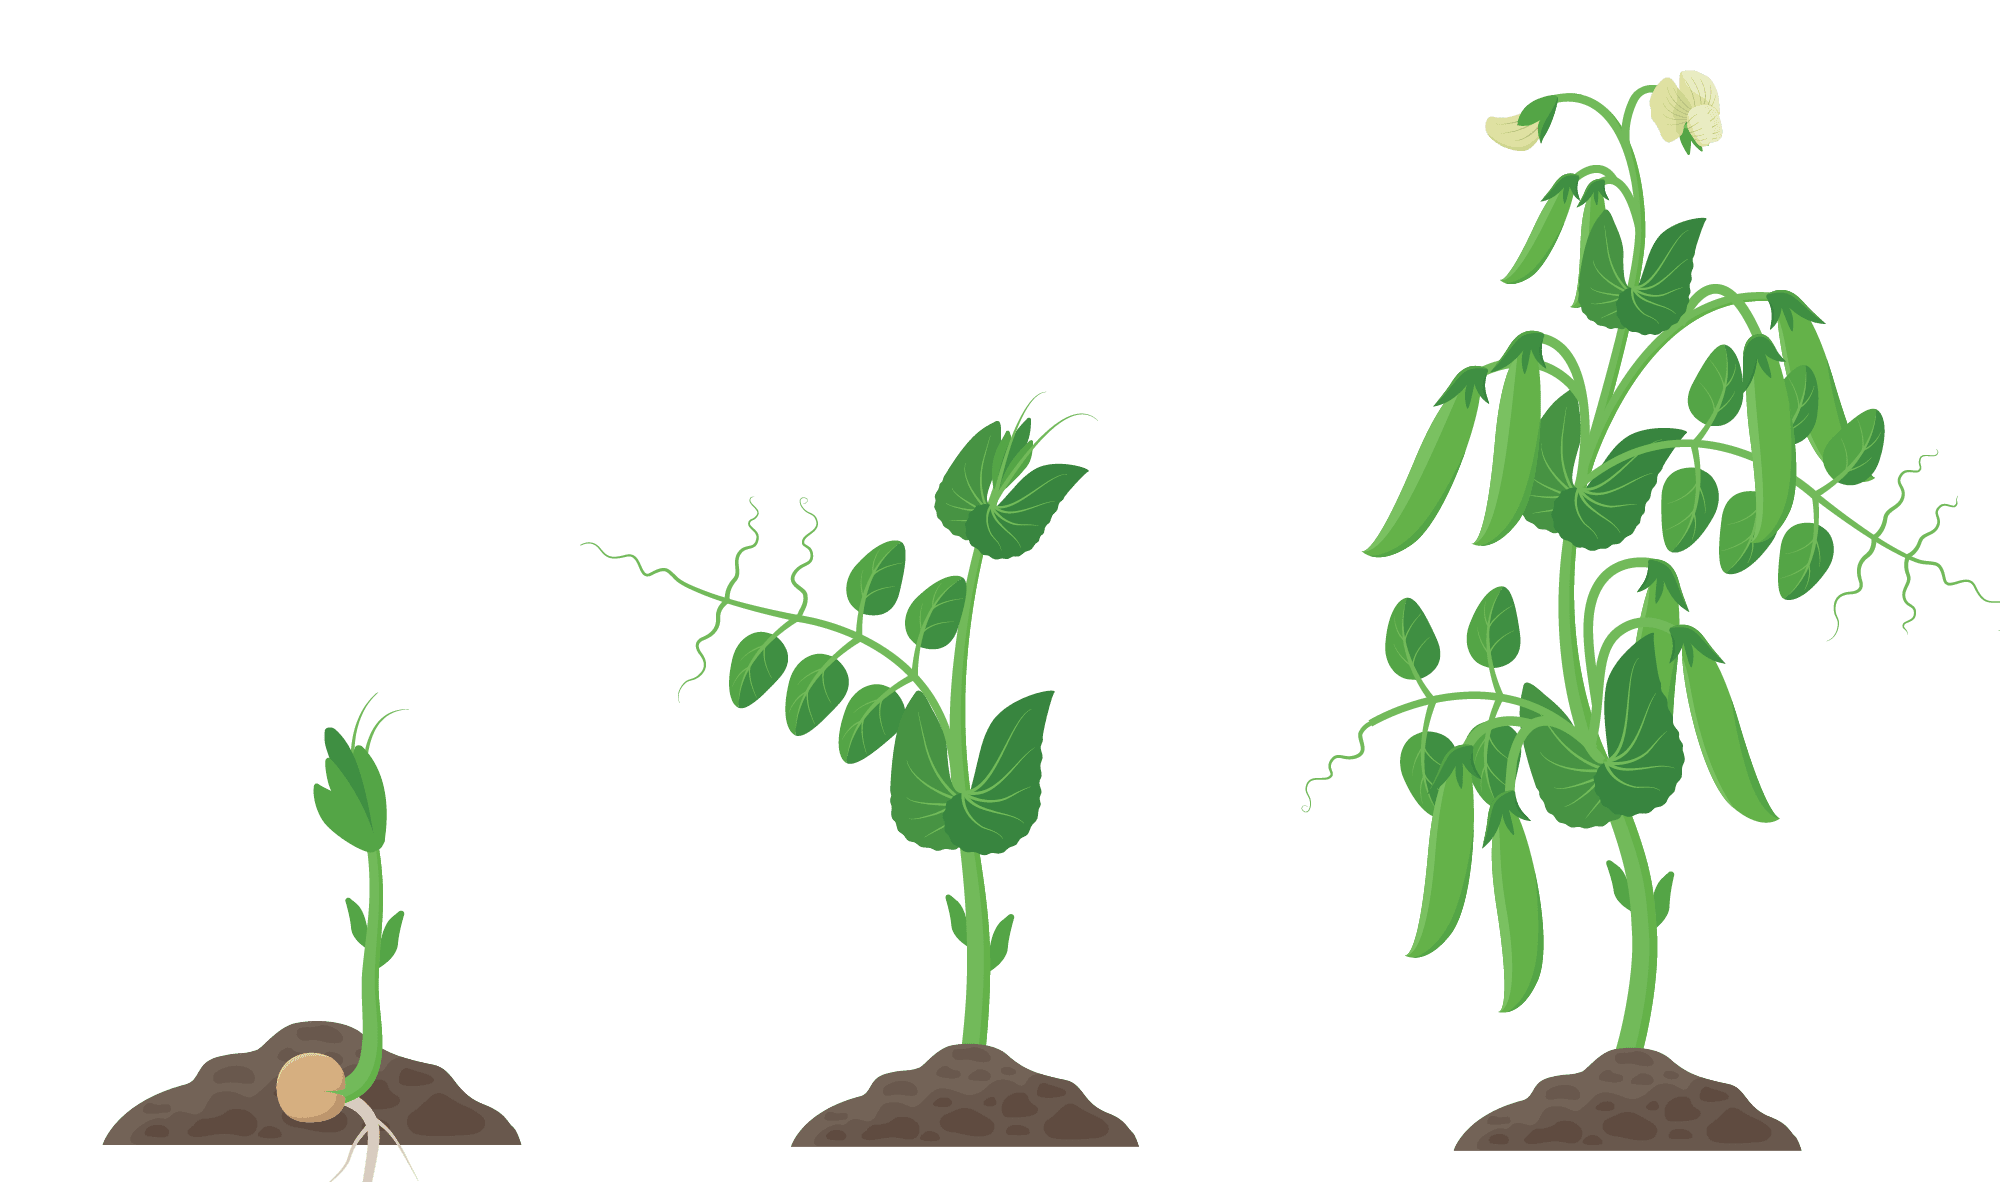 The life cycle of a green bean plant, starting as a seedling.